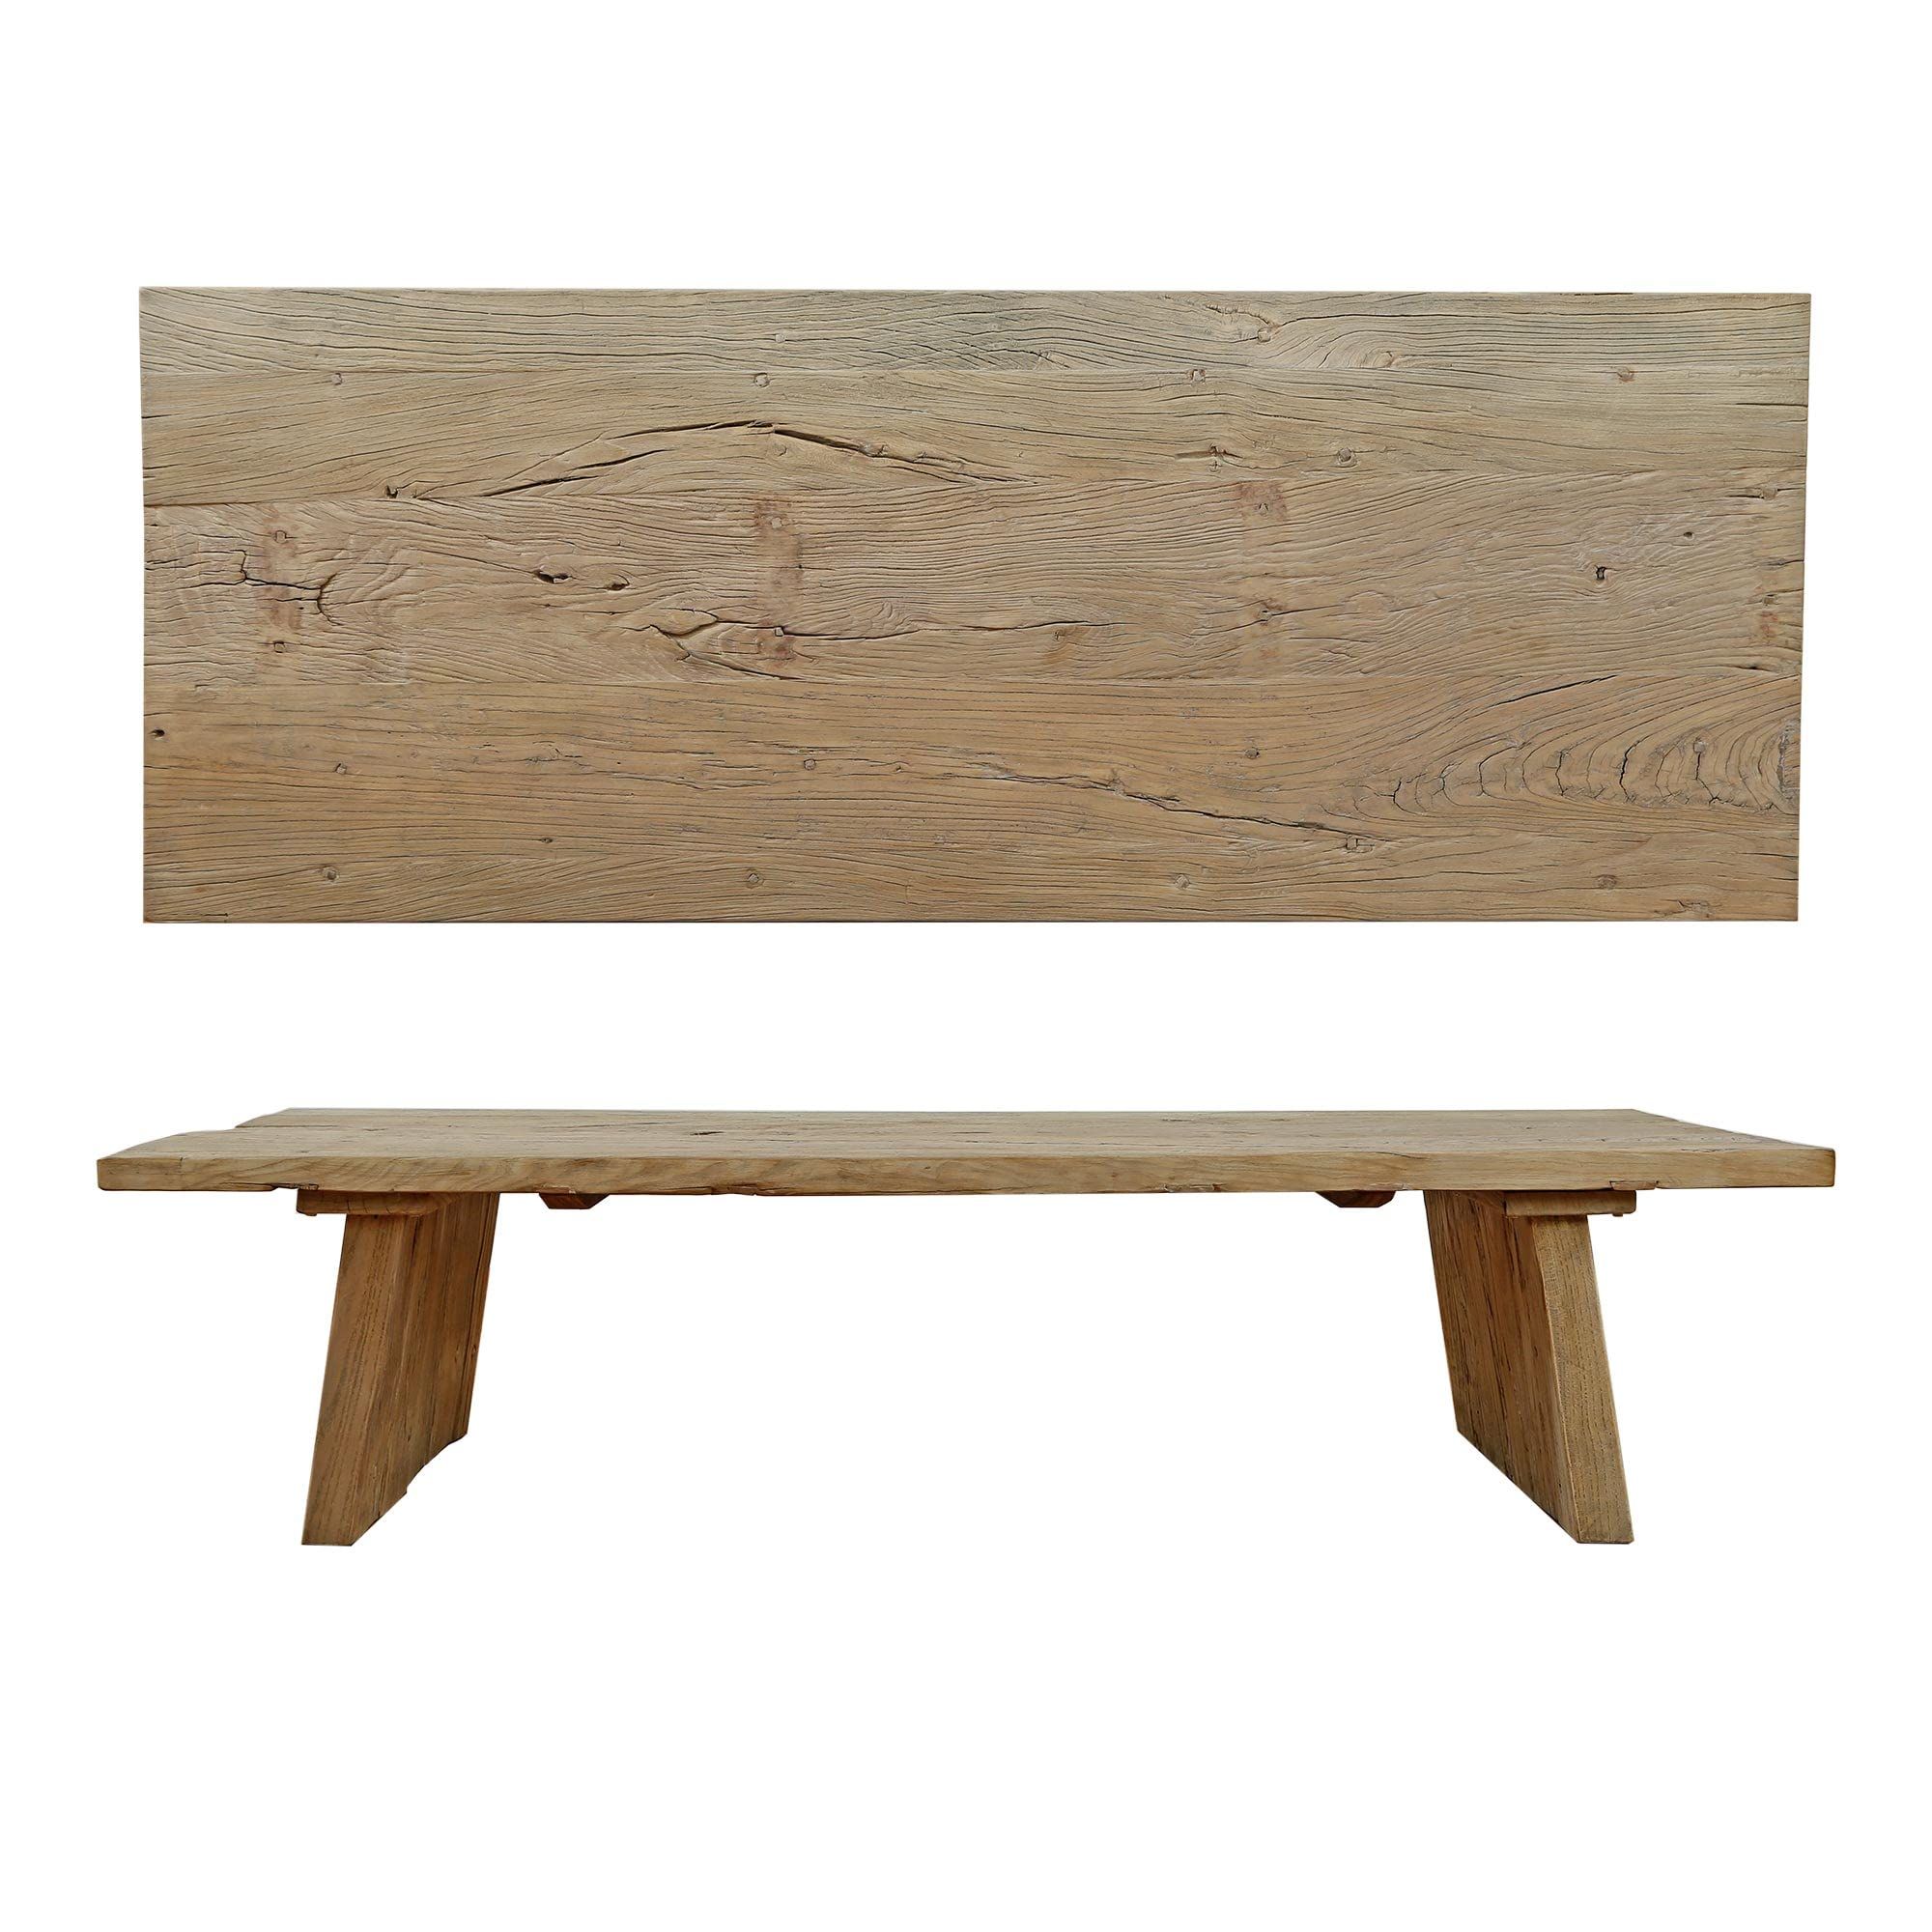 Lily’s Living Laguna Weathered, 67 Inch Wide, Natural Wood Coffee Table | Amazon (US)